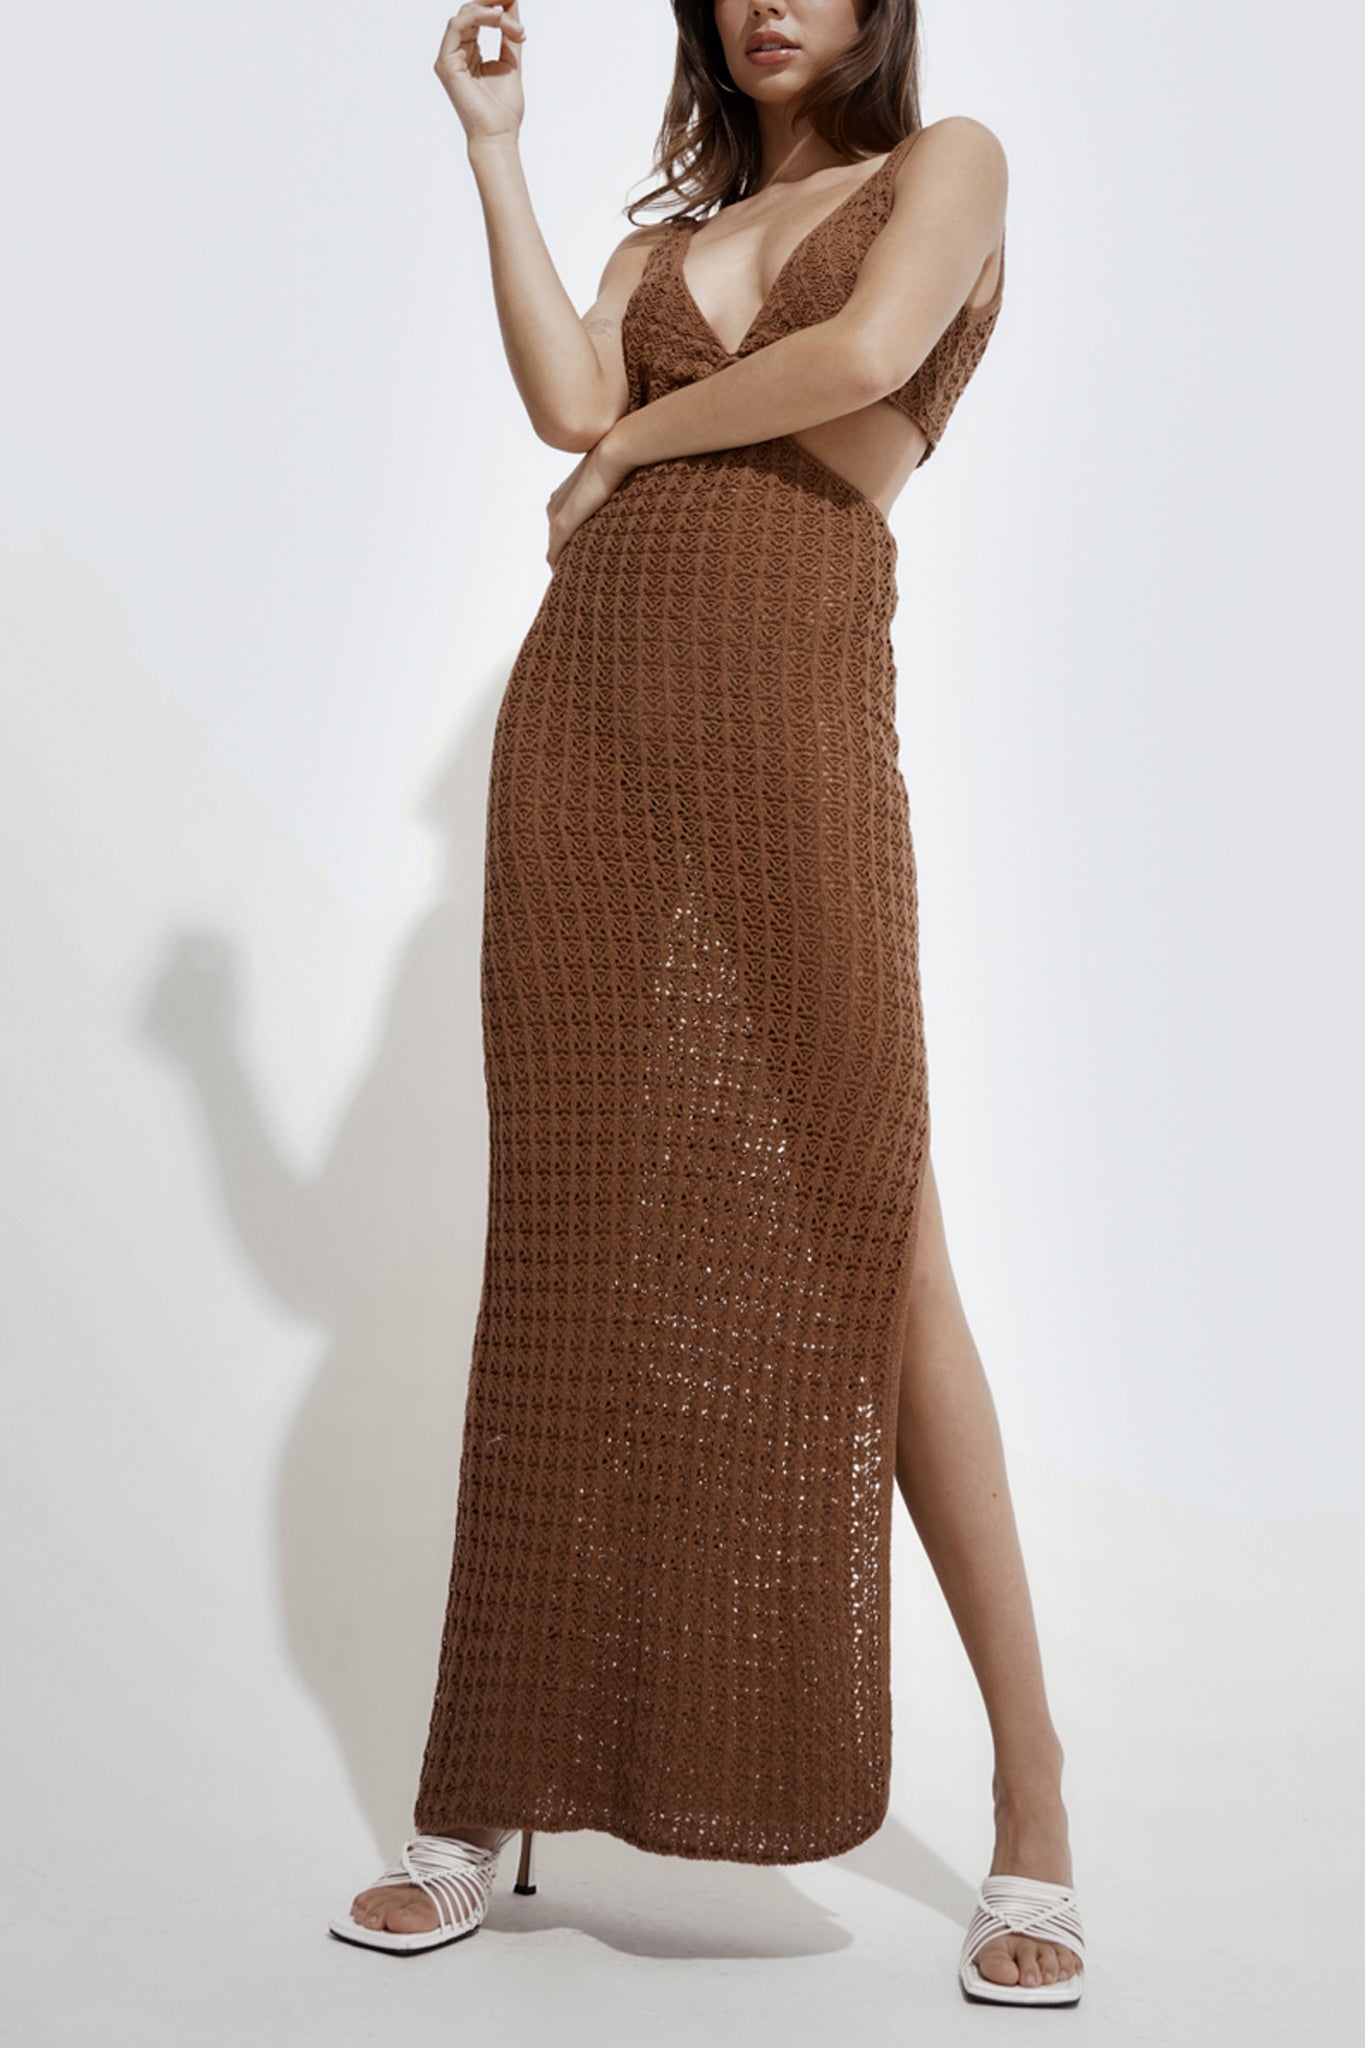 View 2 of Amsonia Dress in Brown, a Dresses from Larrea Cove. Detail: .